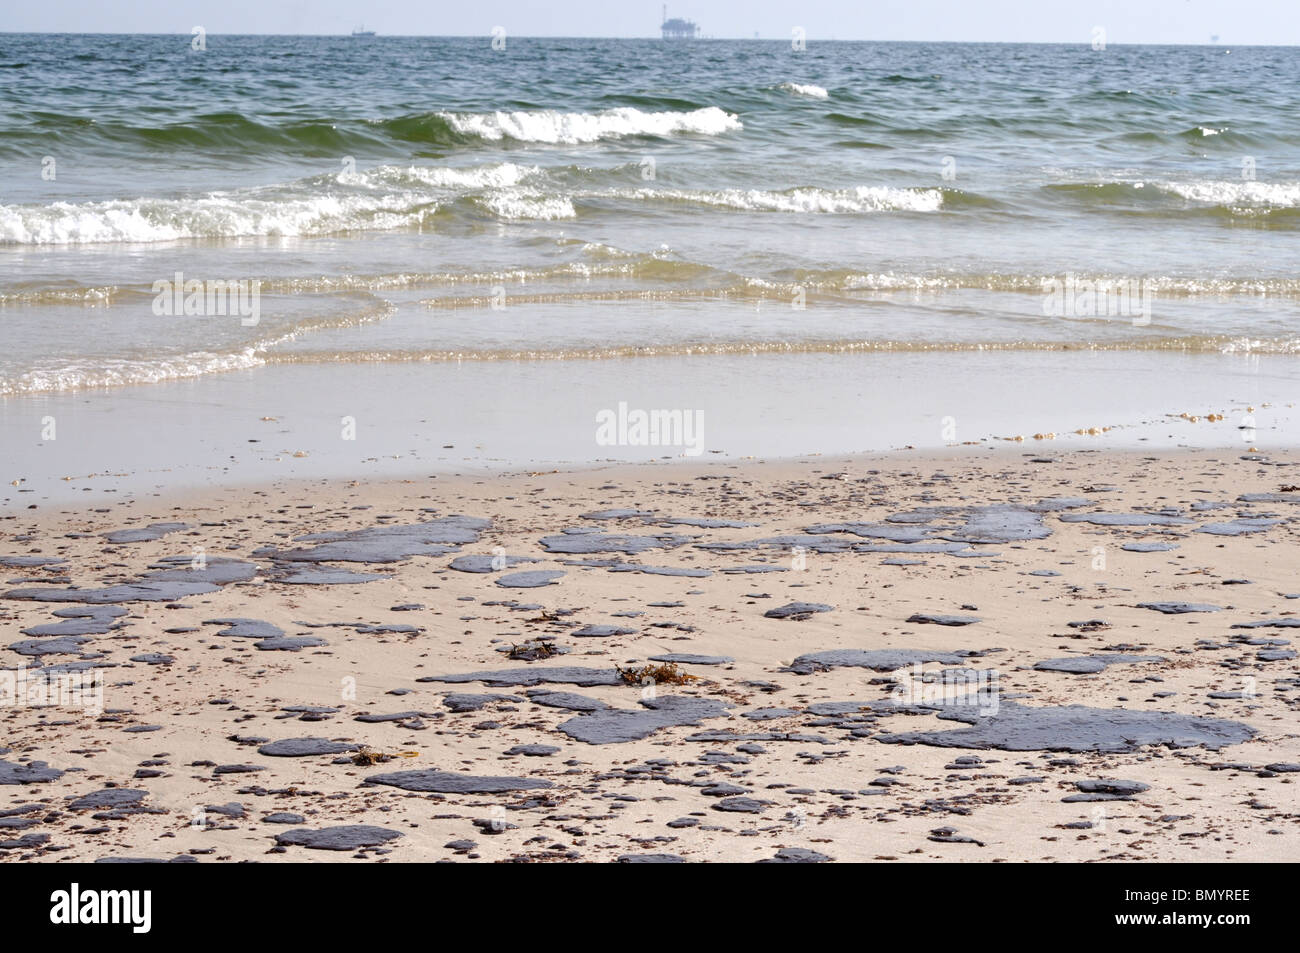 Oil spill on beach with off shore oil rig in background. Stock Photo